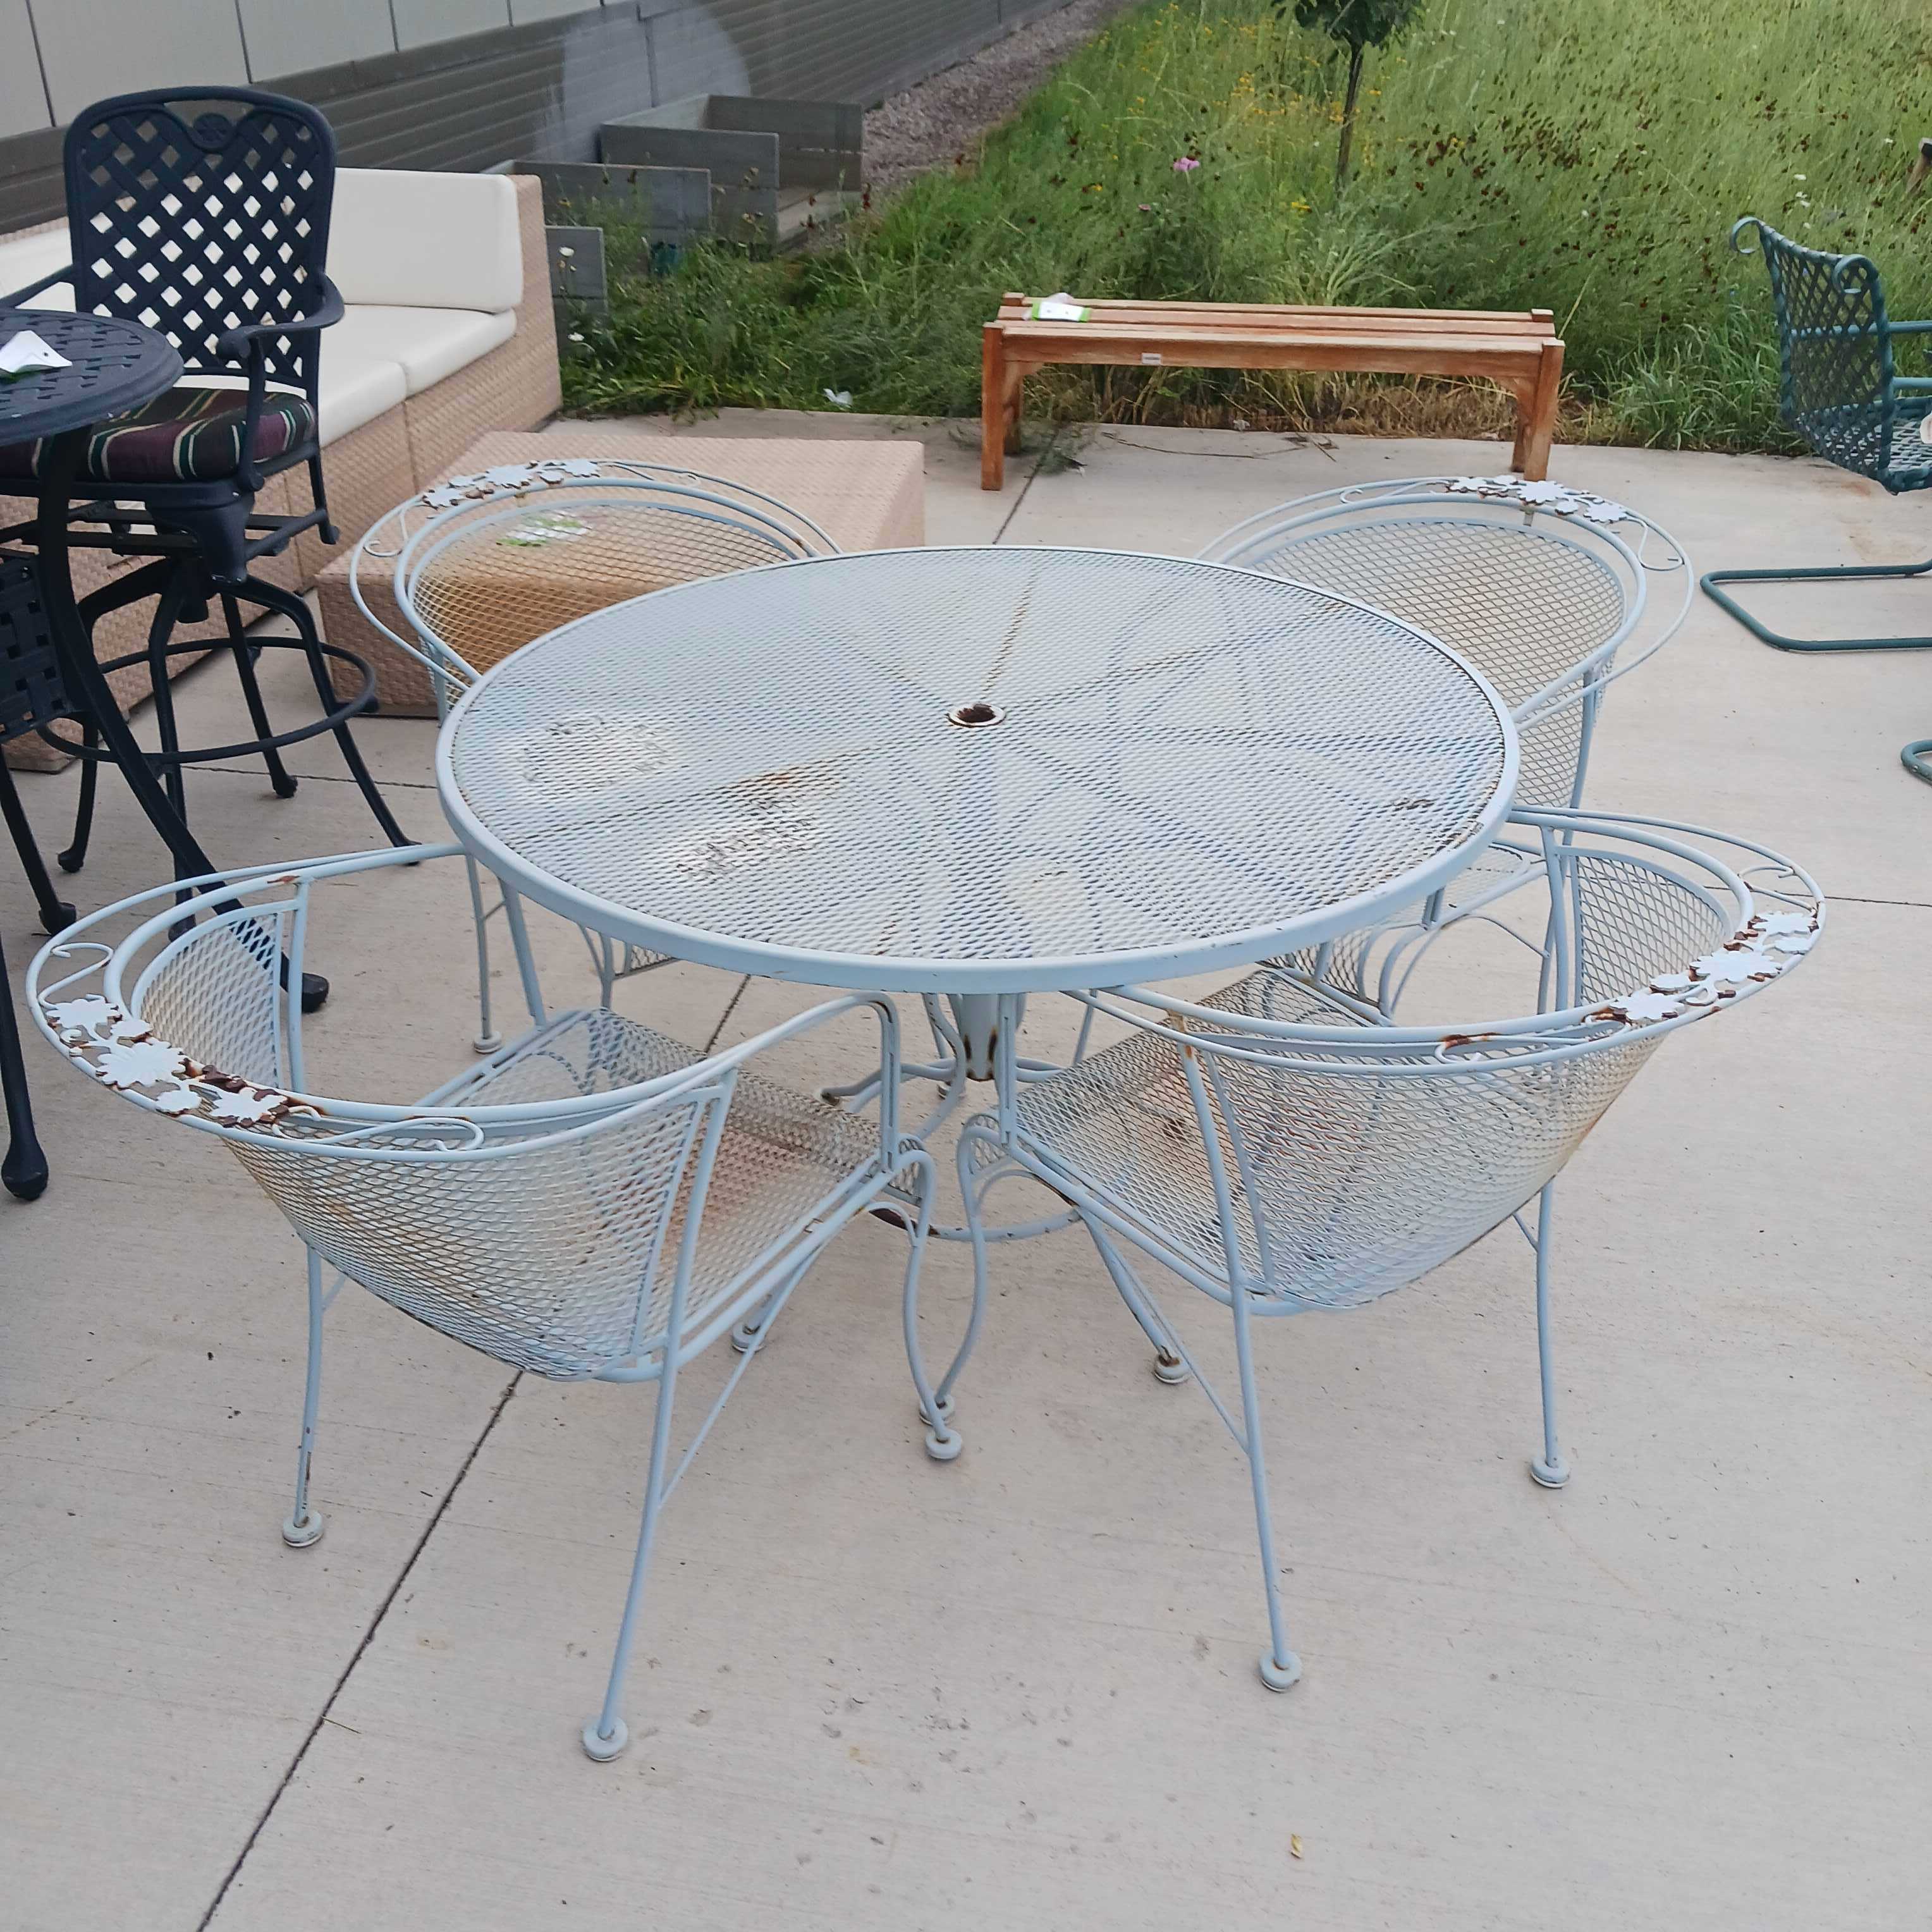 Briarwood with 4 Chairs Patio Set